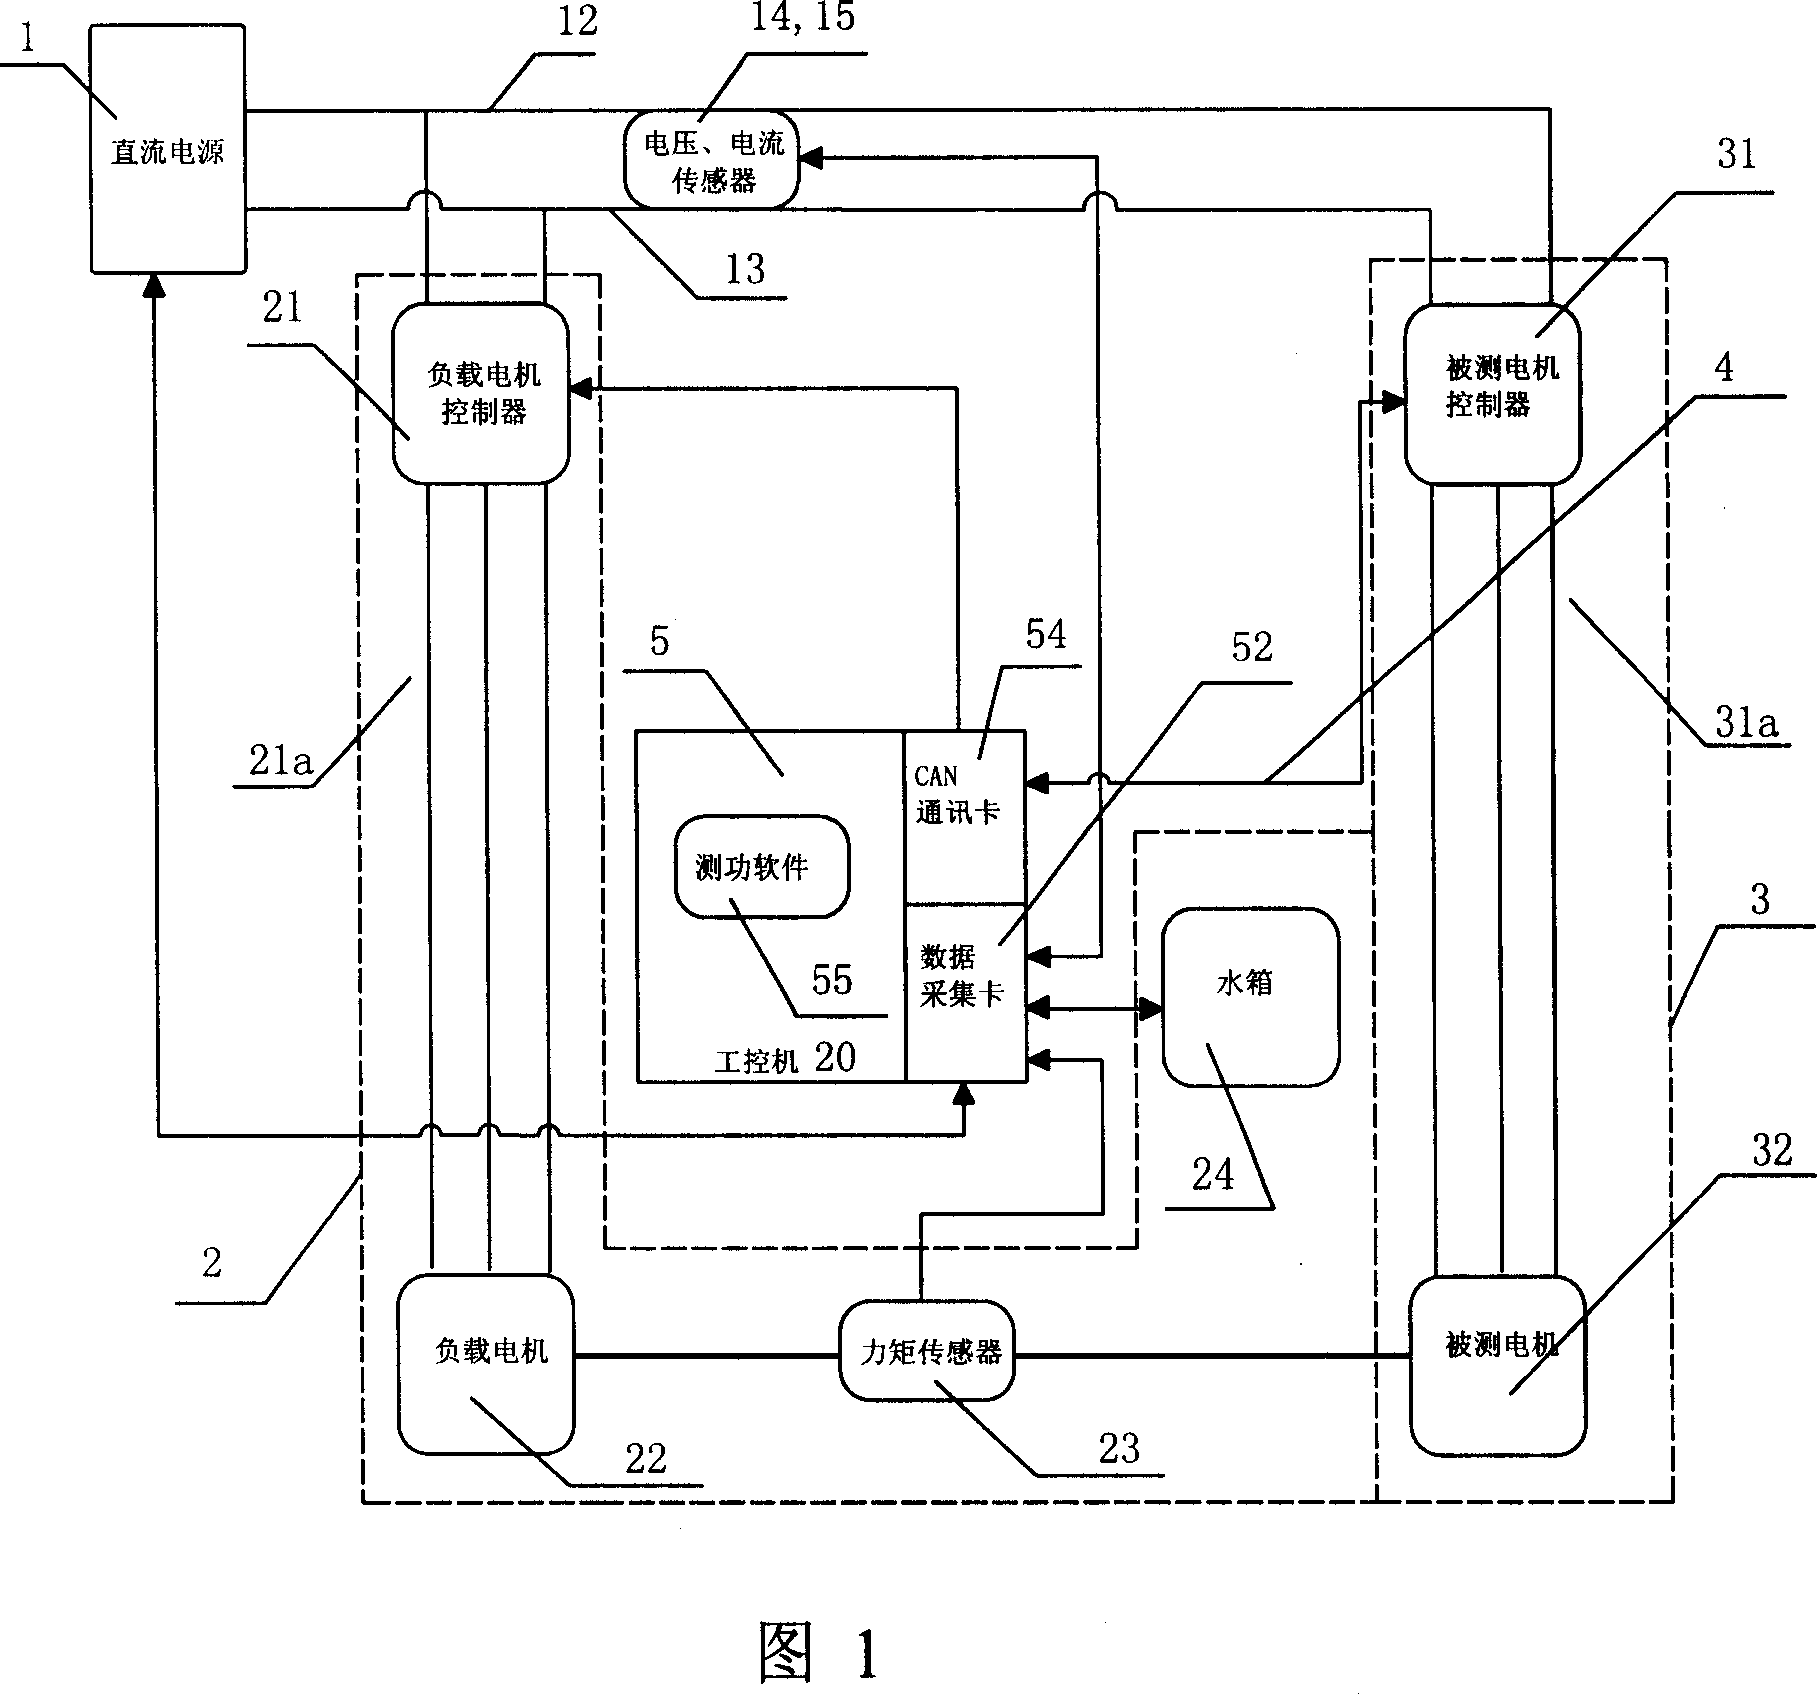 Dynamometer machine monitoring system having control and data acquisition function